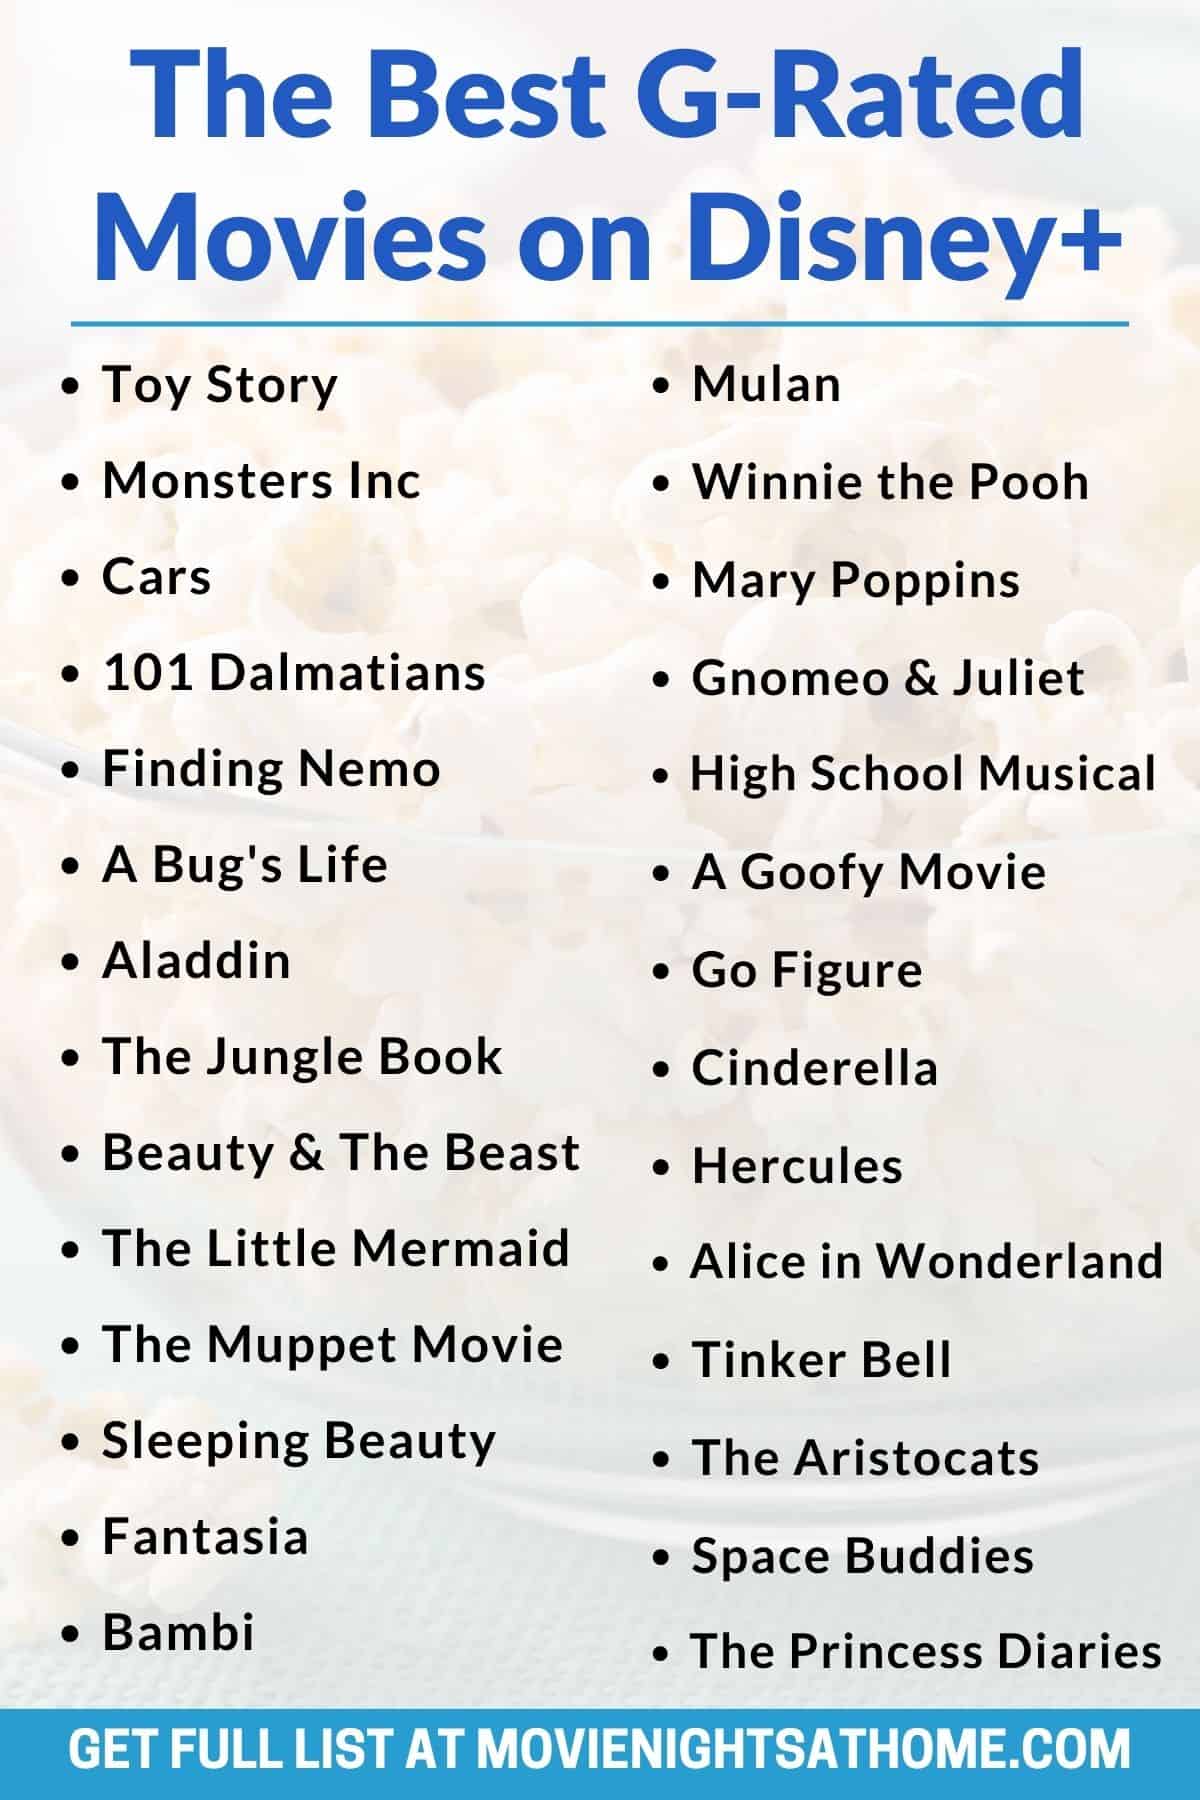 the best g-rated movies on disney plus - list of a few of the movies